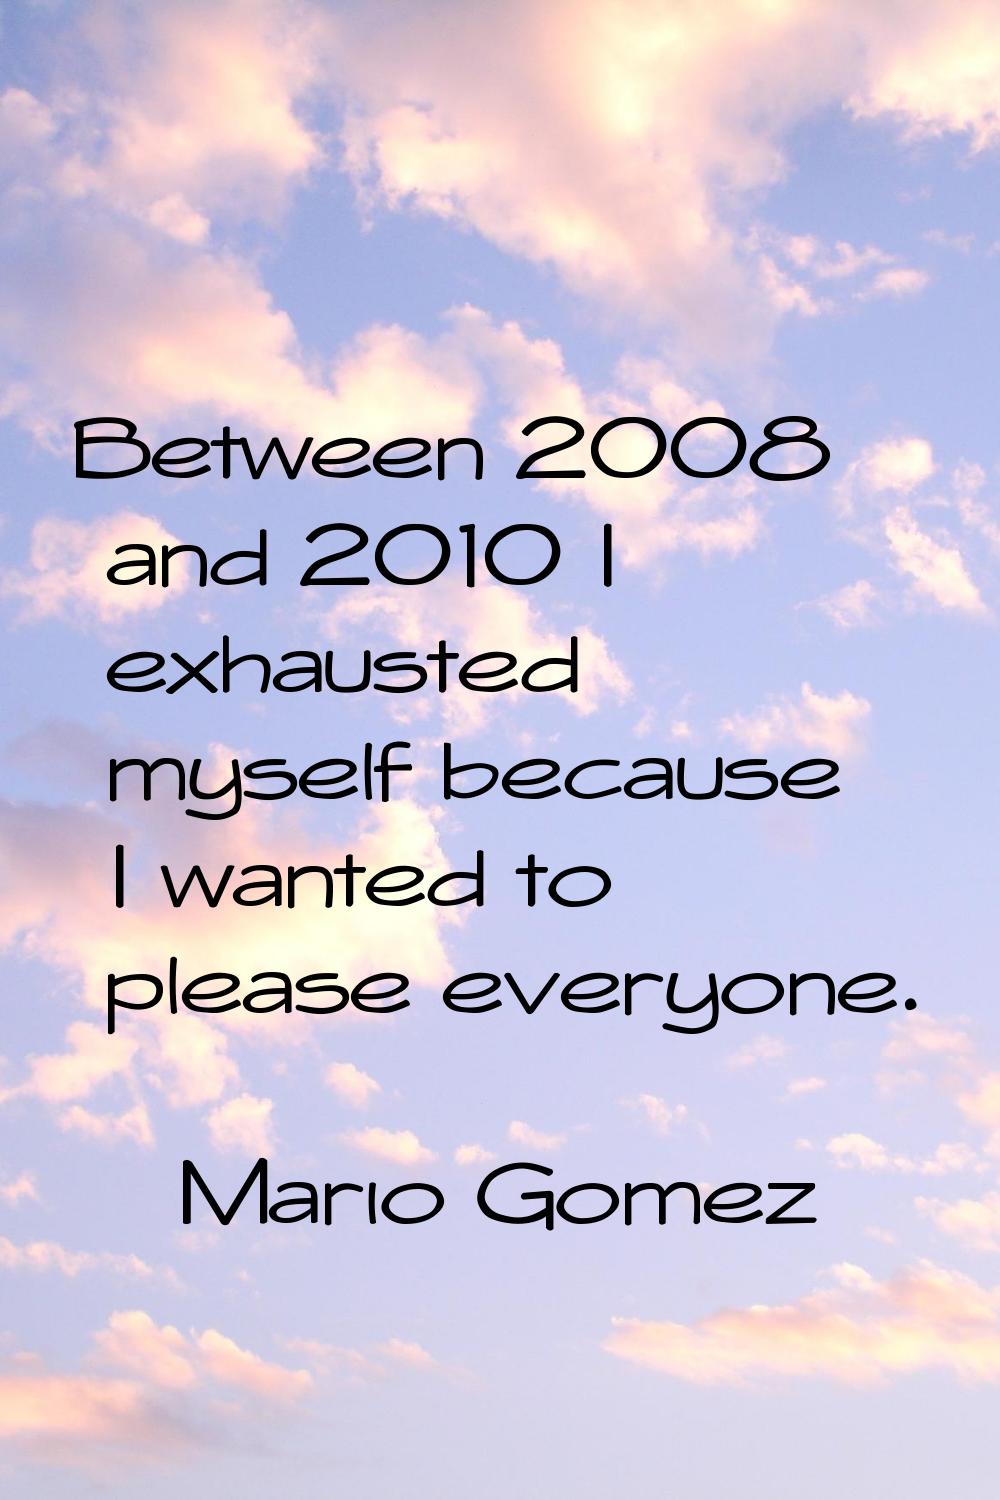 Between 2008 and 2010 I exhausted myself because I wanted to please everyone.